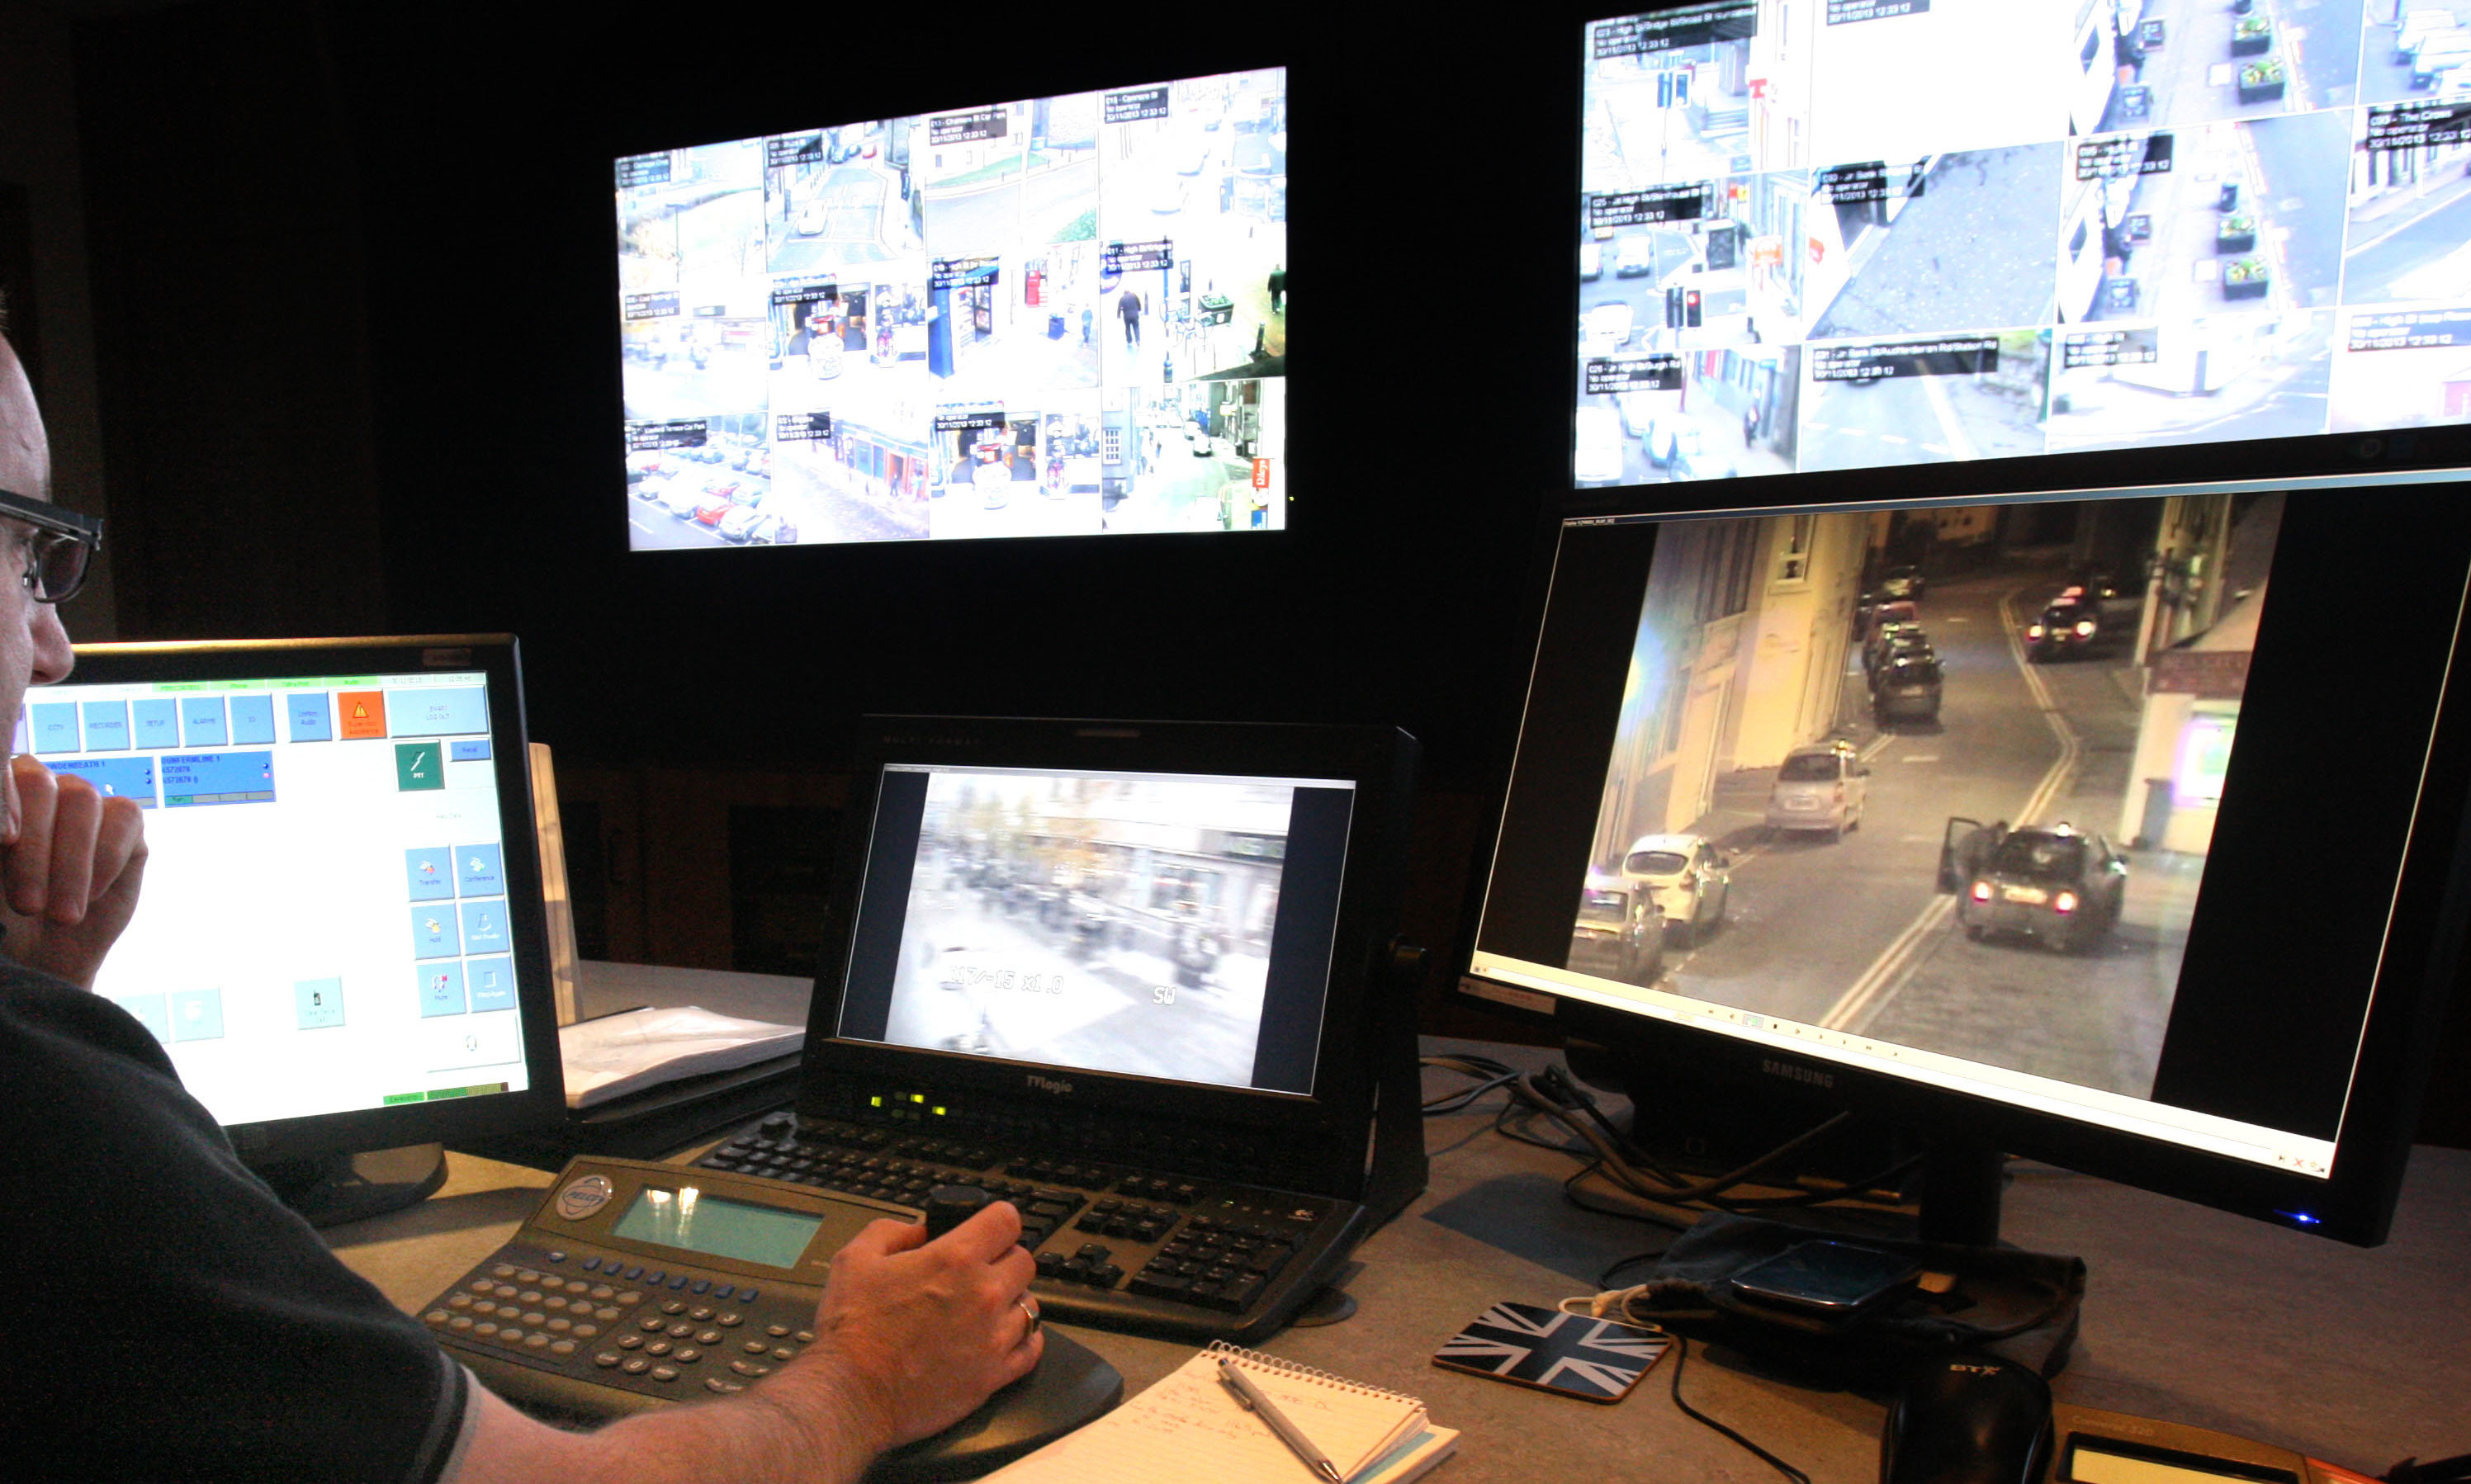 CCTV cameras are monitored round-the-clock from Police Scotland Fife headquarters in Glenrothes